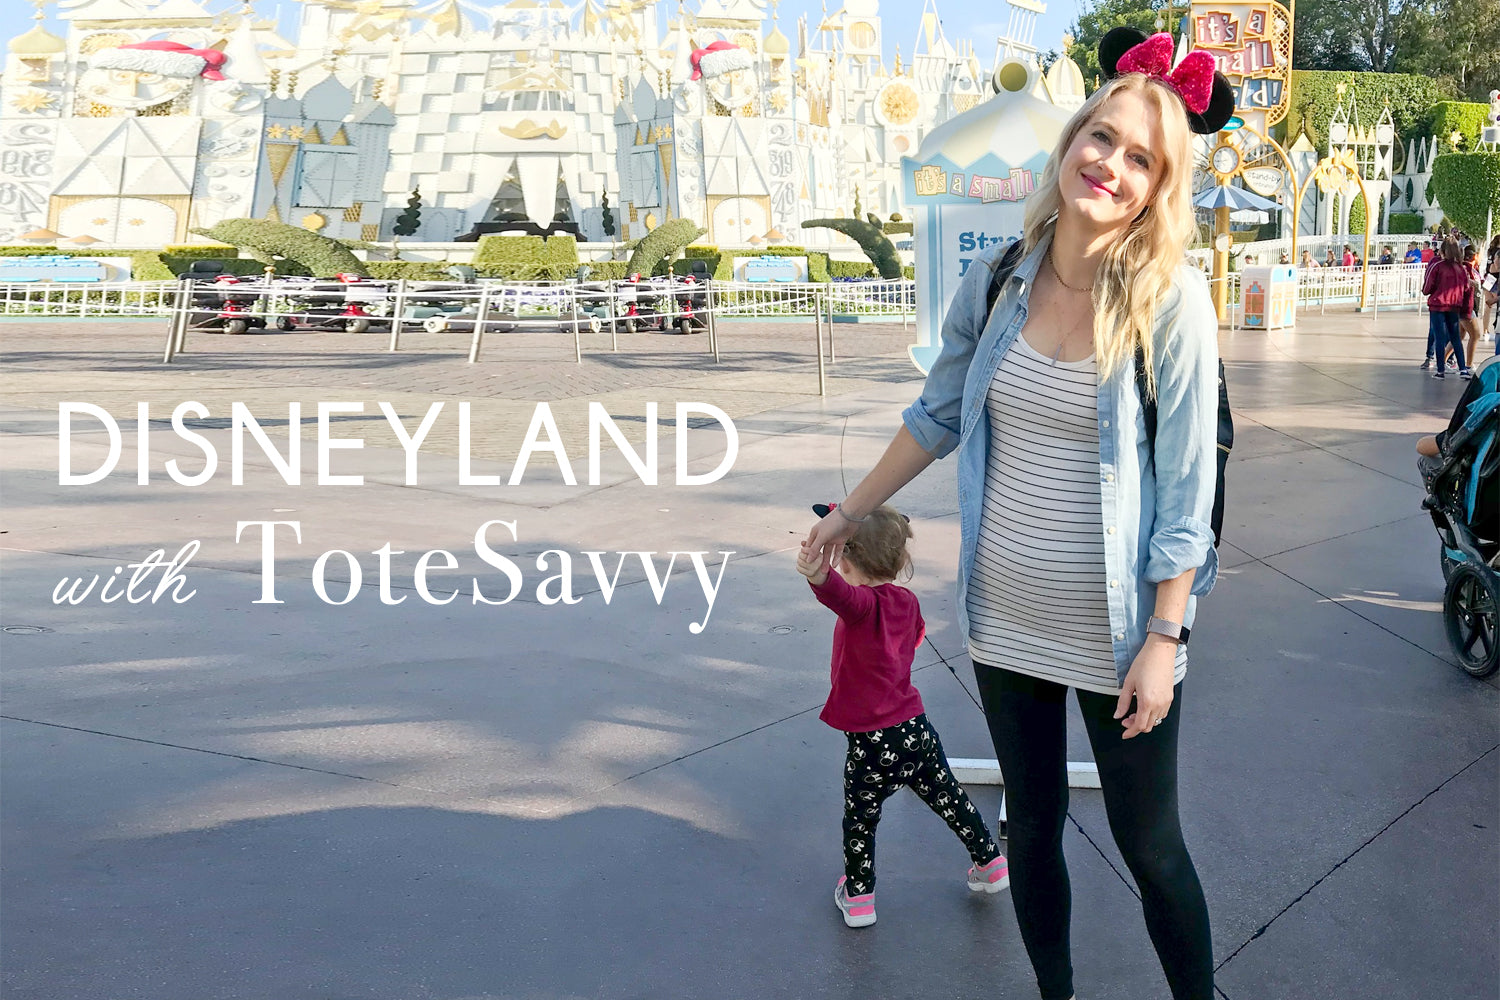 How Our CEO Packs Her ToteSavvy for Disneyland